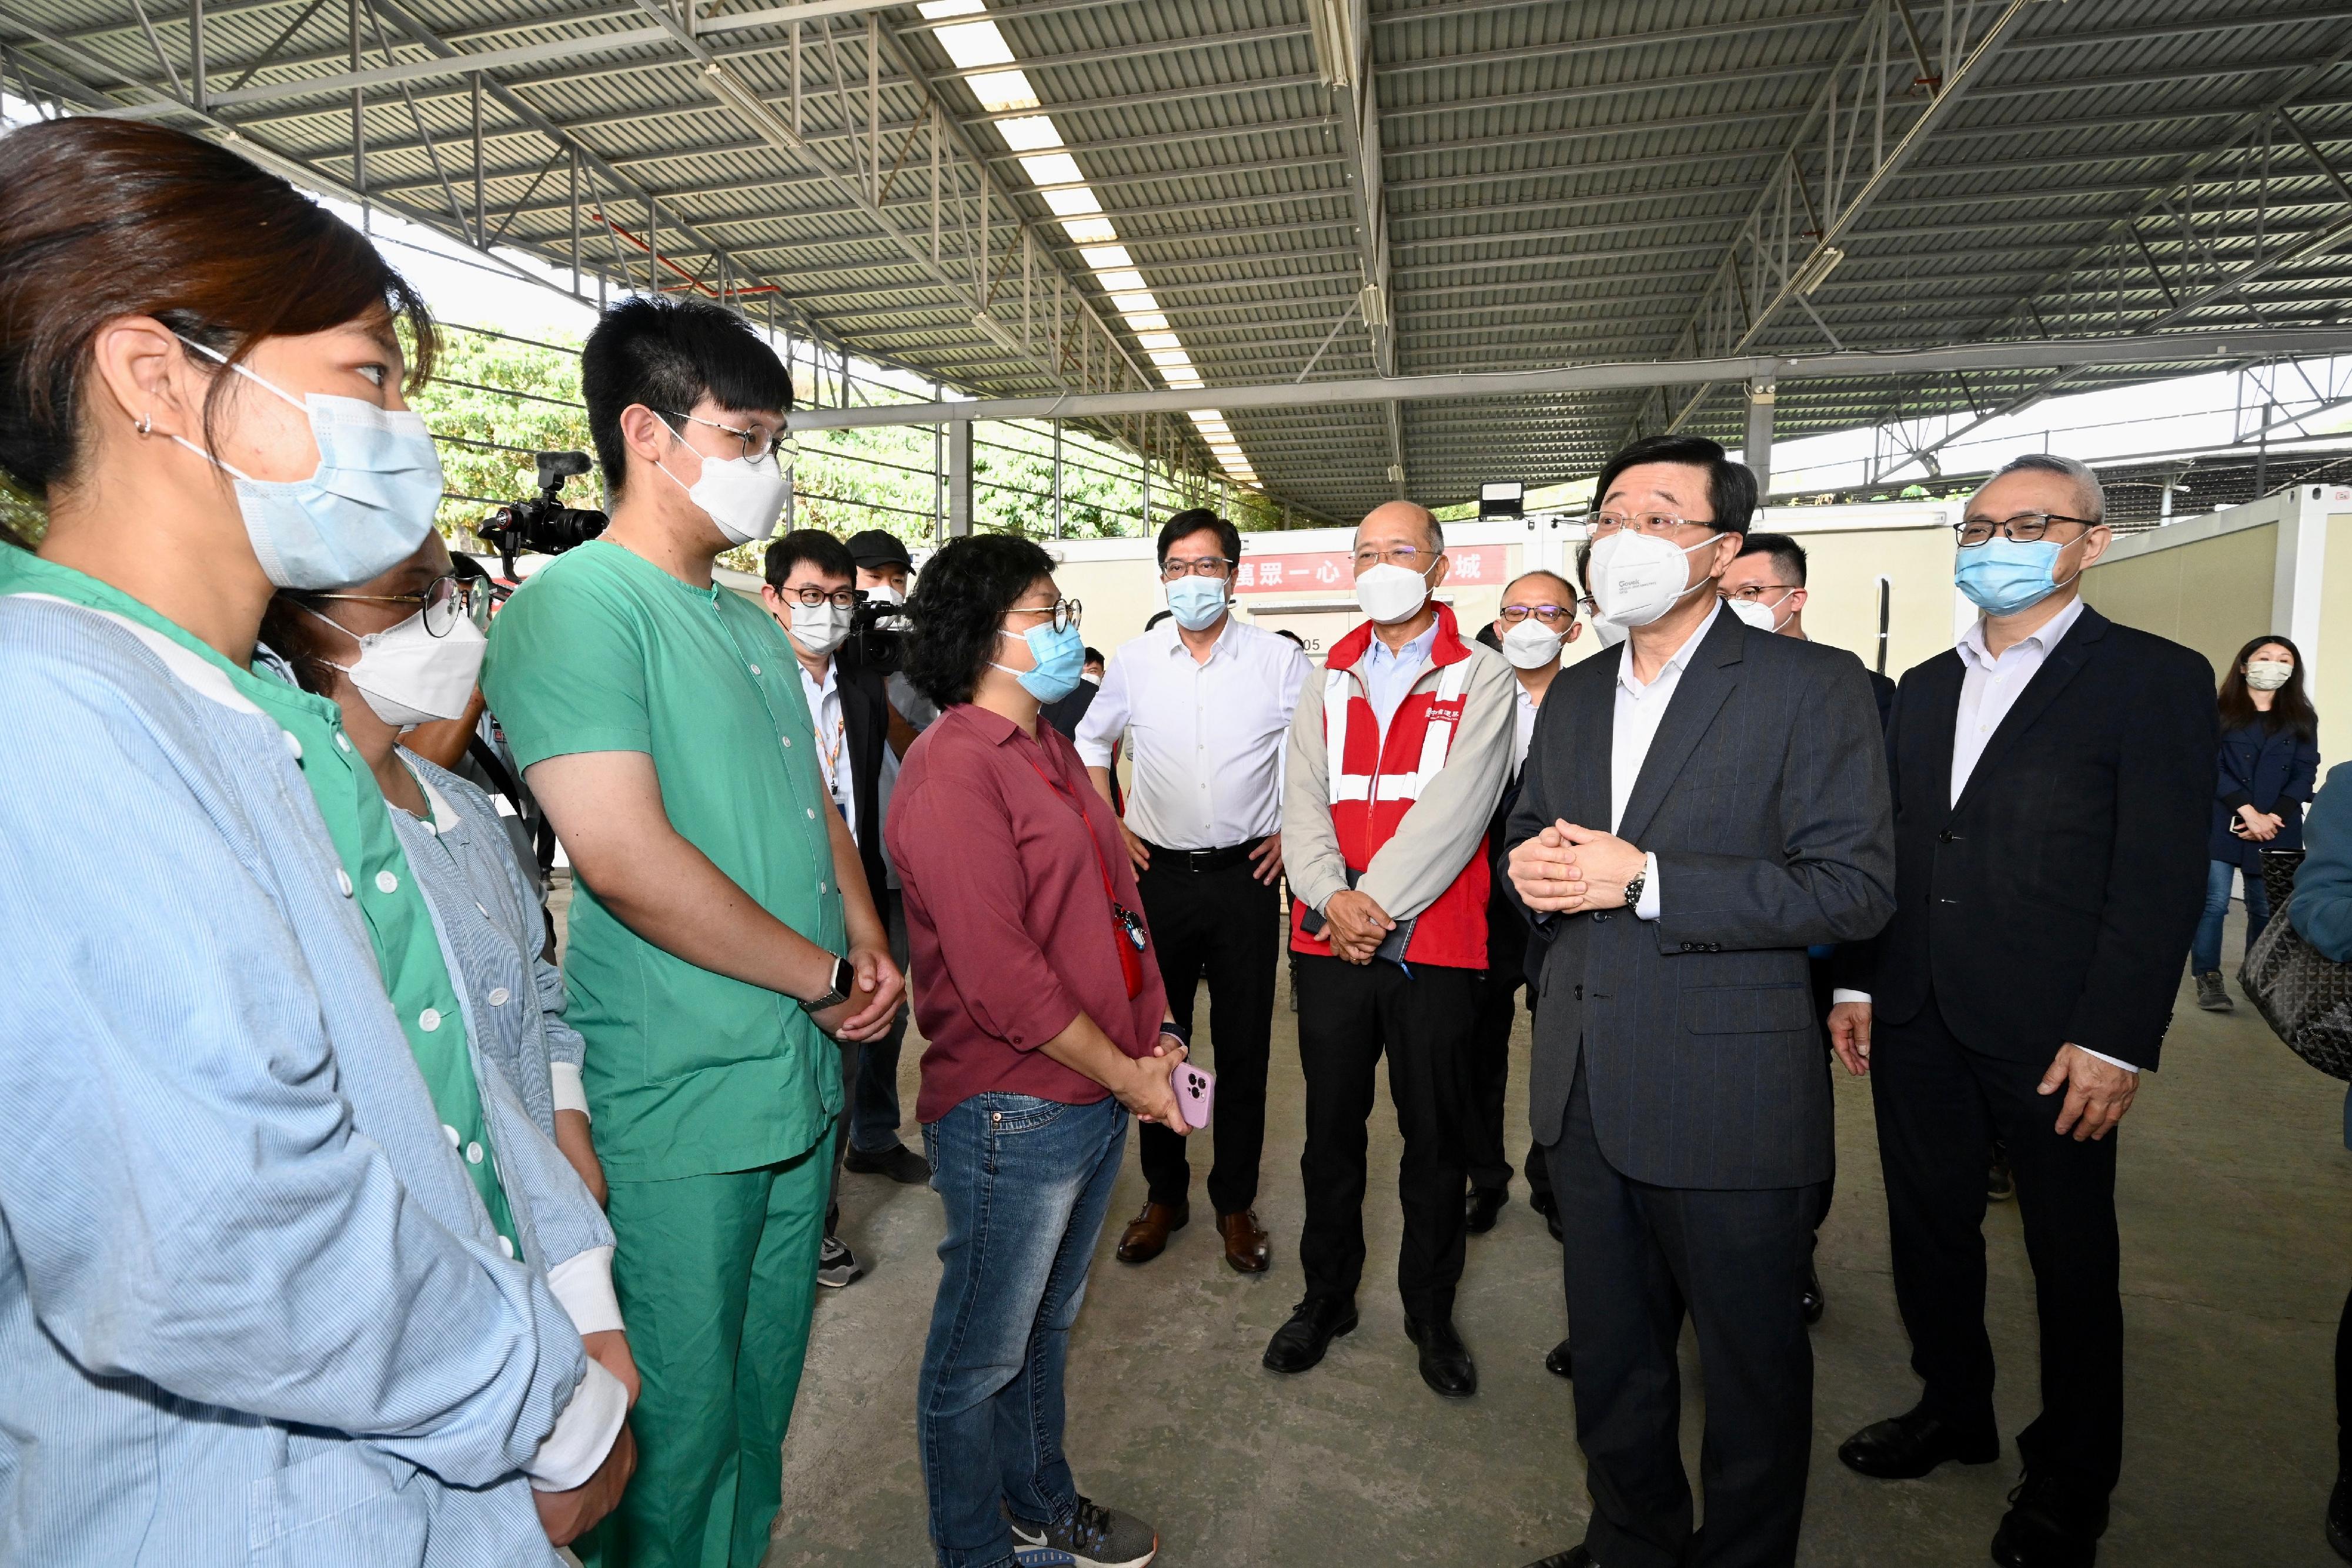 The Chief Secretary for Administration, Mr John Lee, this morning (March 17) visited the fifth community isolation facility constructed with Mainland support near Kai Pak Ling Road at Hung Shui Kiu in Yuen Long. Photo shows Mr Lee (second right) chatting with medical and nursing staff on-site. Looking on are the Secretary for Development, Mr Michael Wong (fifth right), and the Under Secretary for Food and Health, Dr Chui Tak-yi (first right).